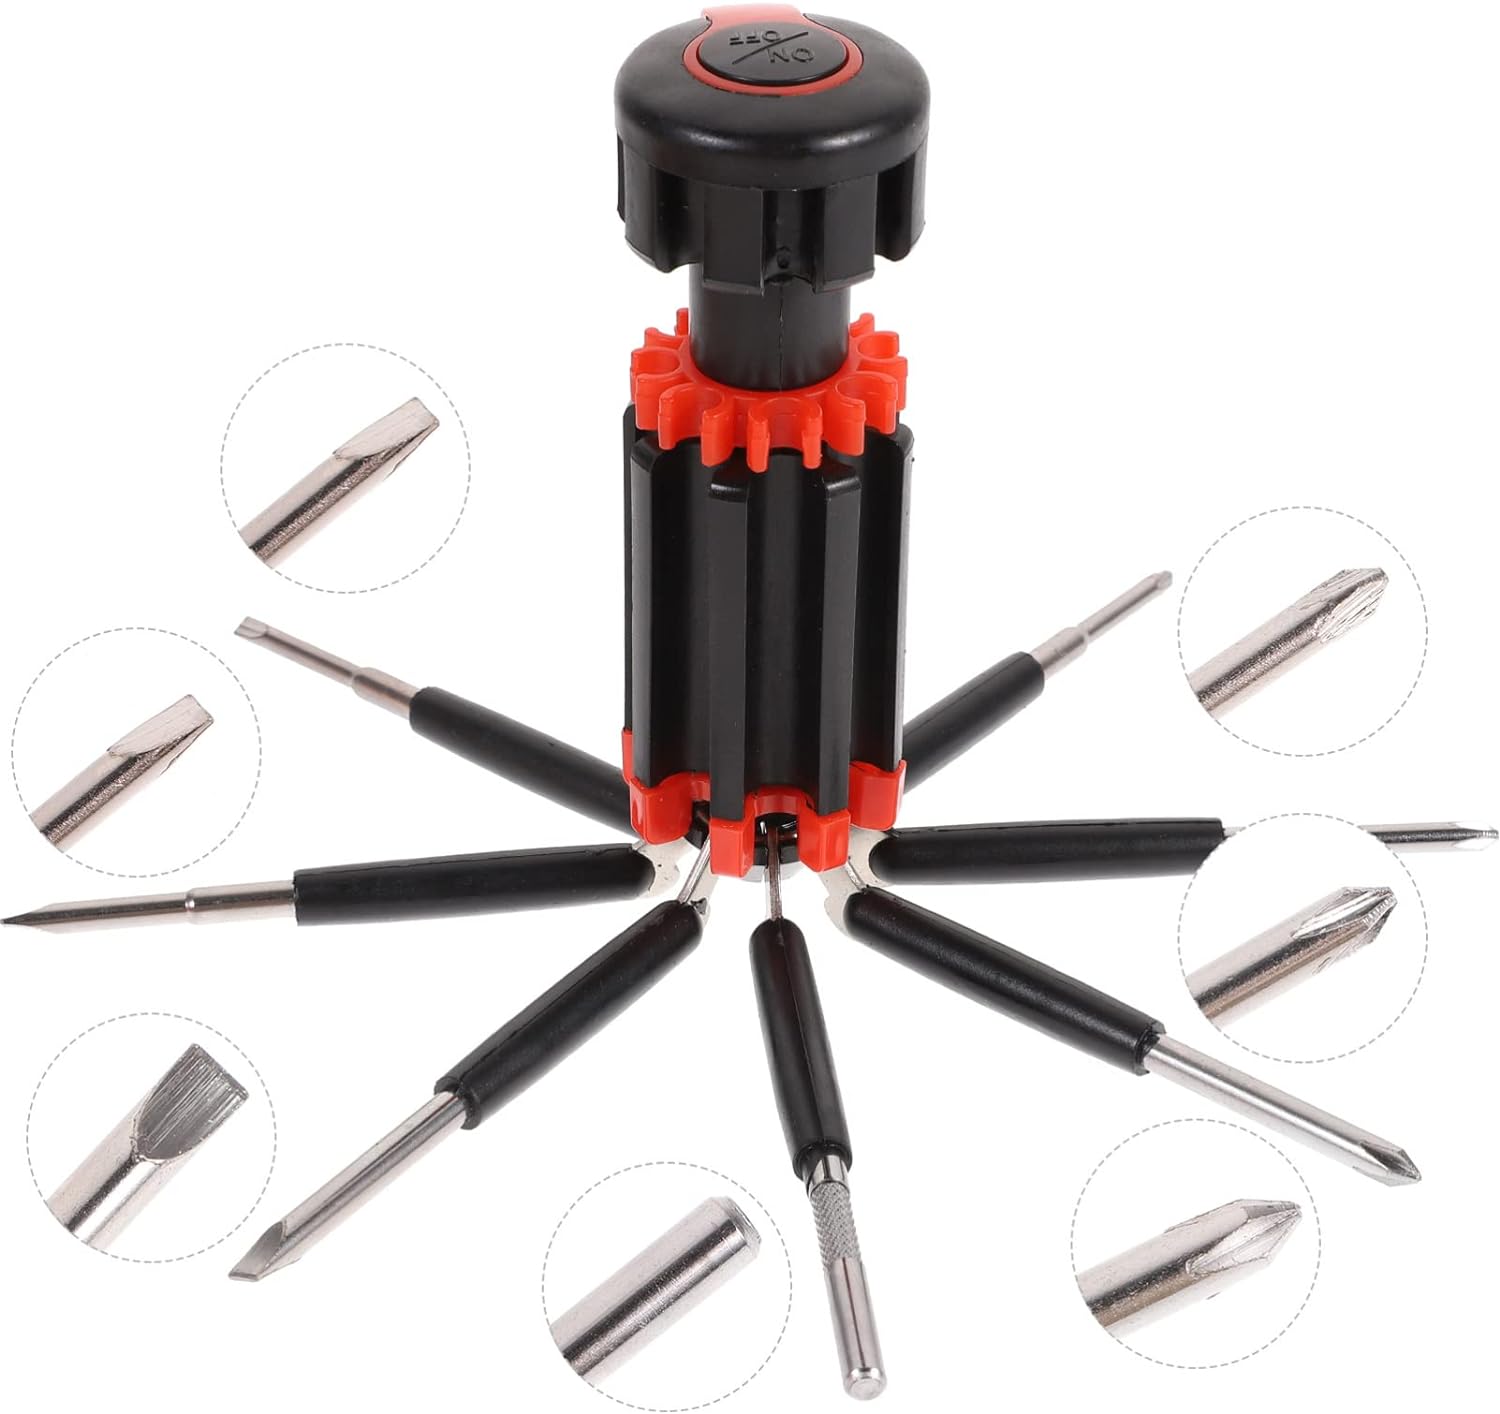 8 in 1 Screwdriver with Flashlight